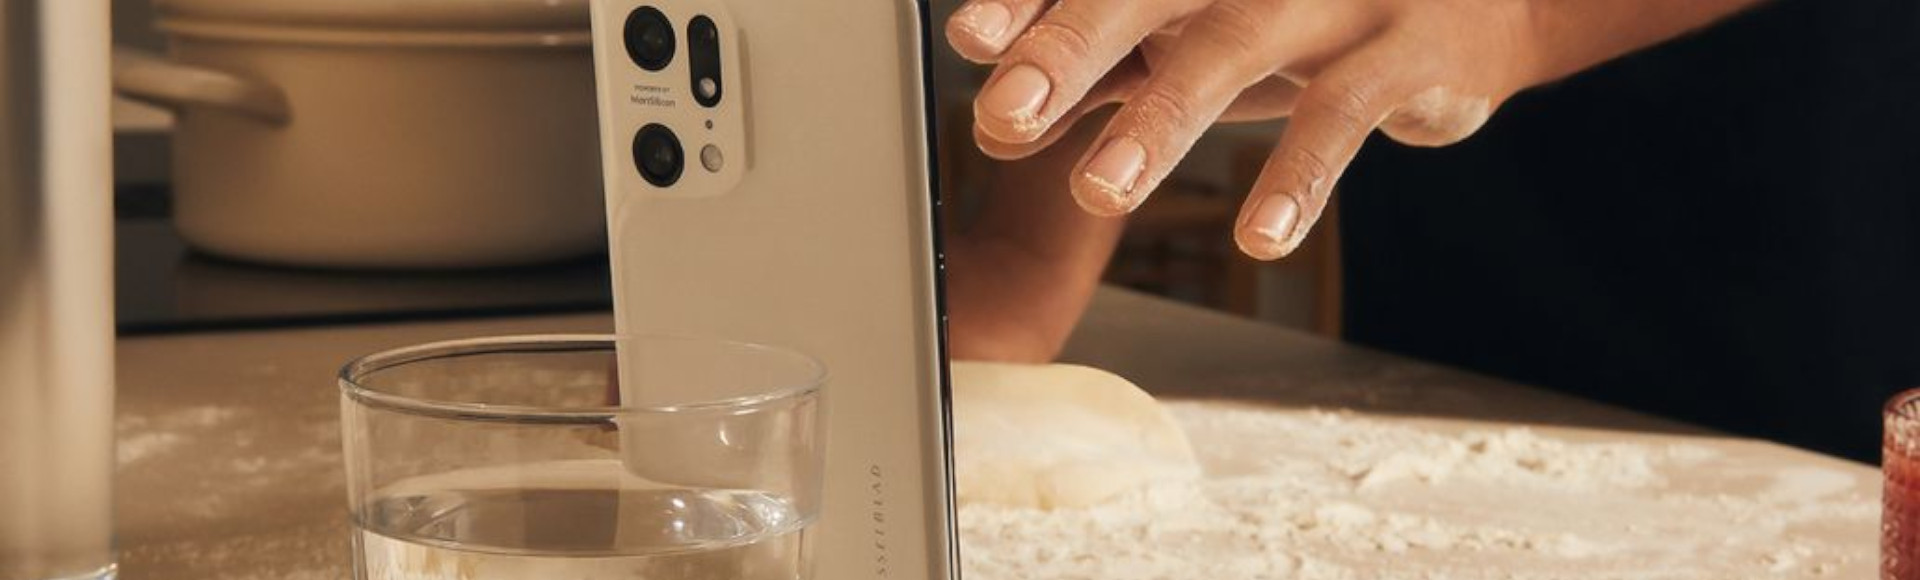 Oppo X5 Pro at the kitchen along with glass of water and floor